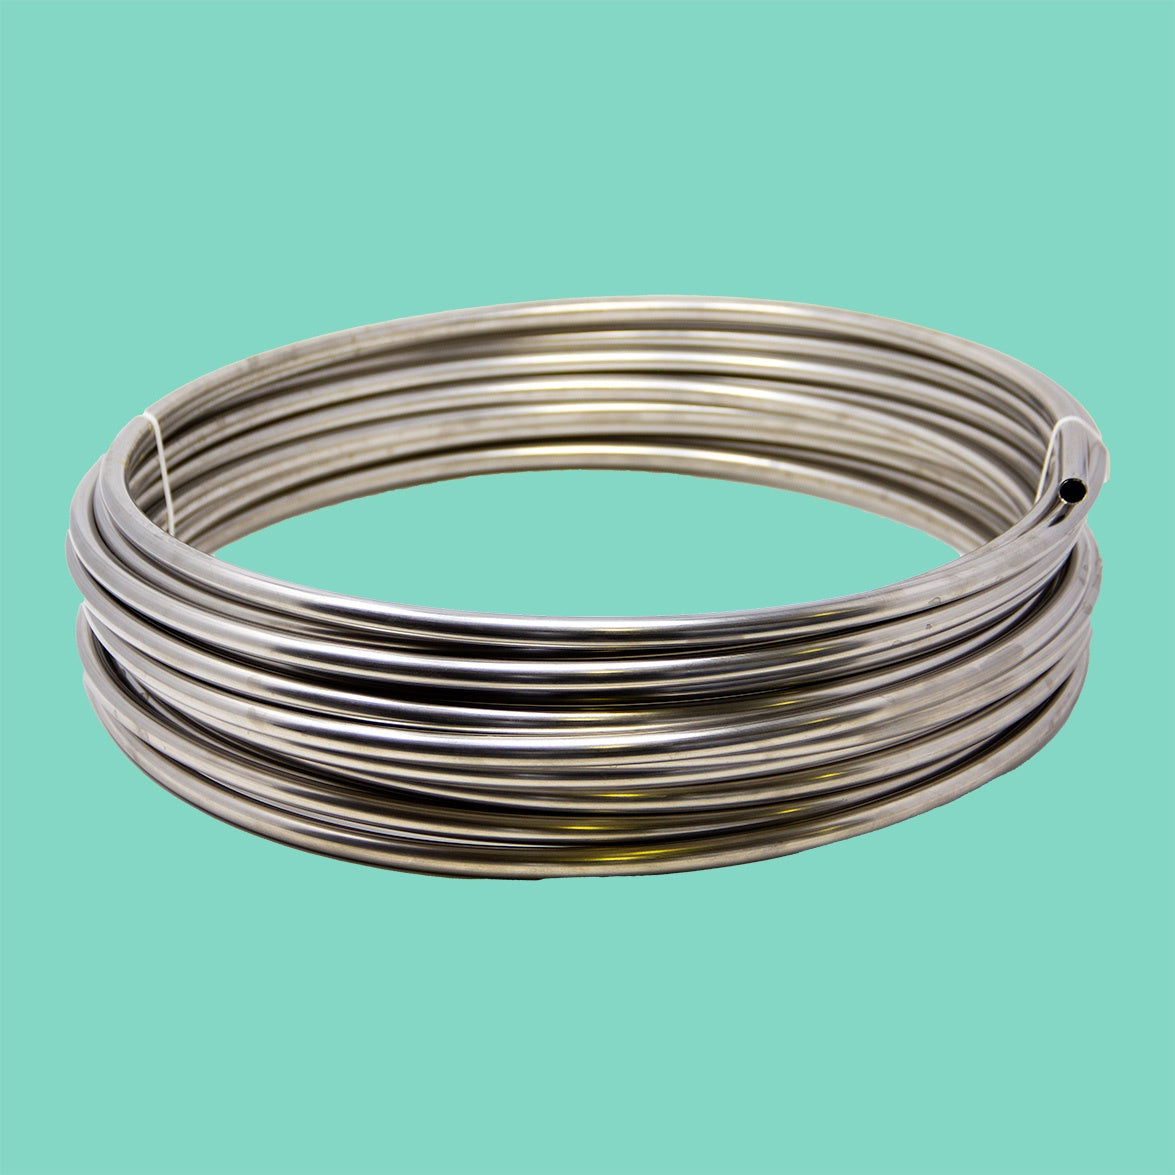 Stainless Steel Coil | 50' x 3/8"